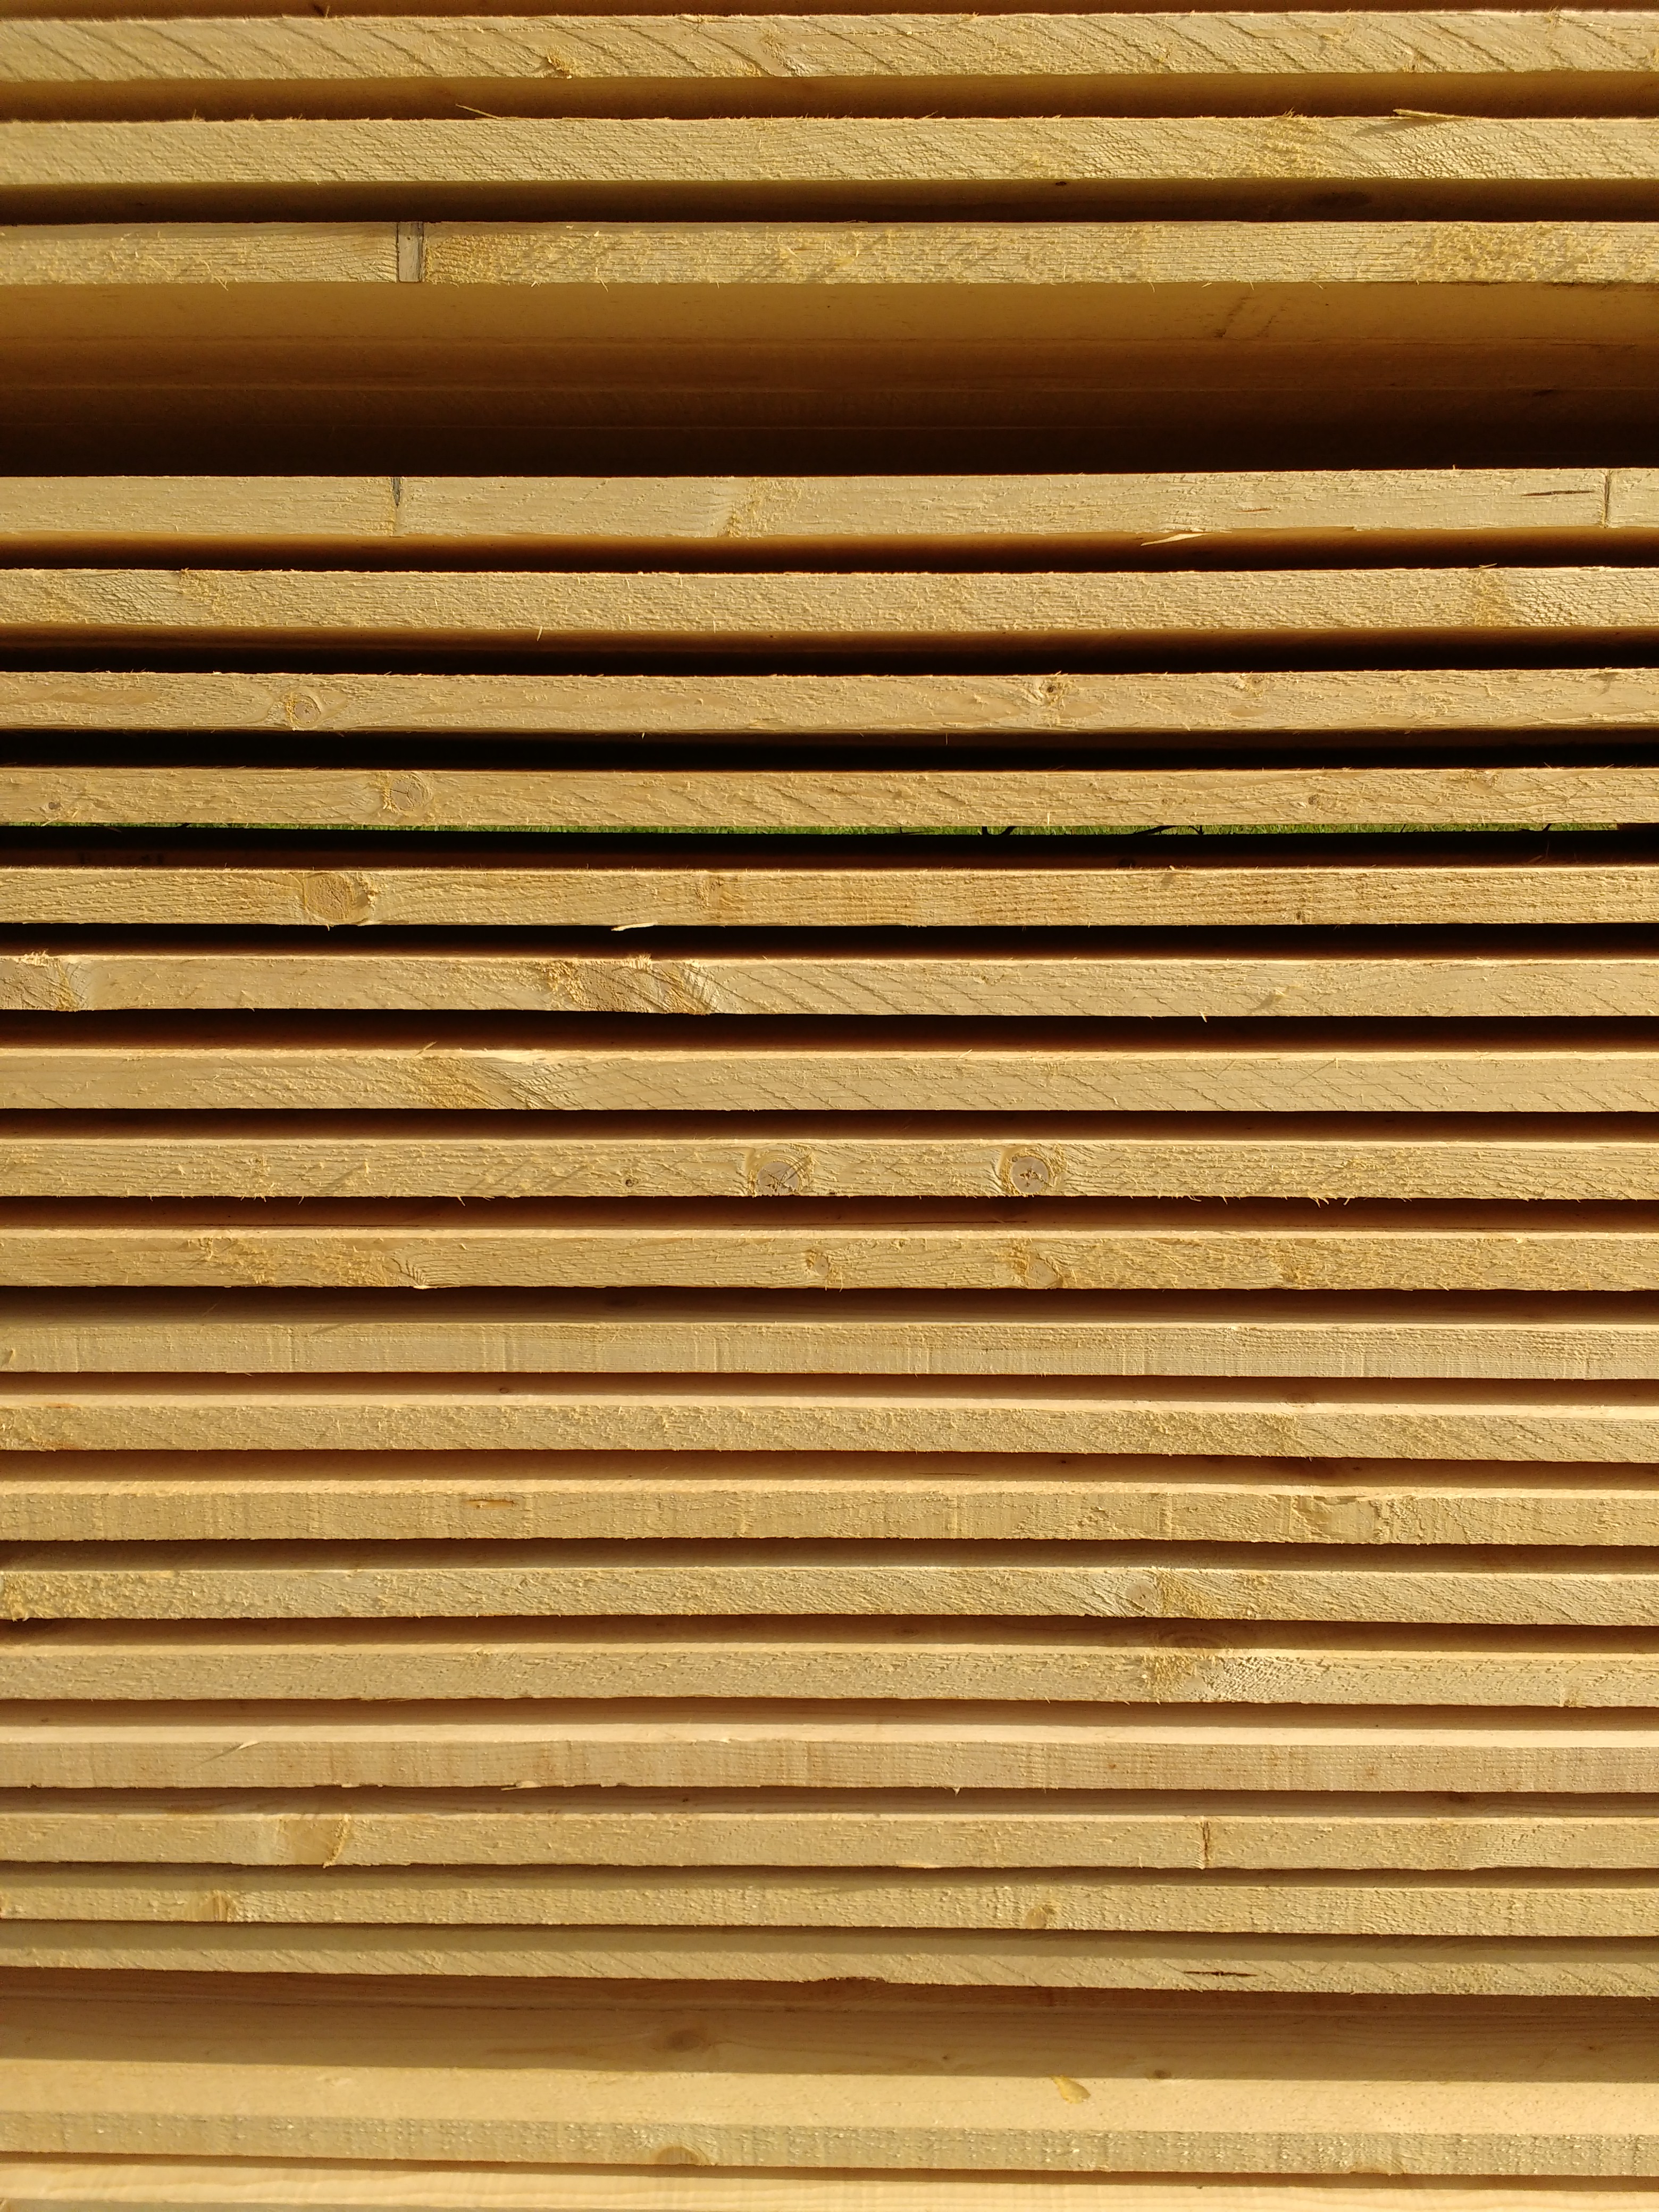 Stack of wooden planks - close-up 02